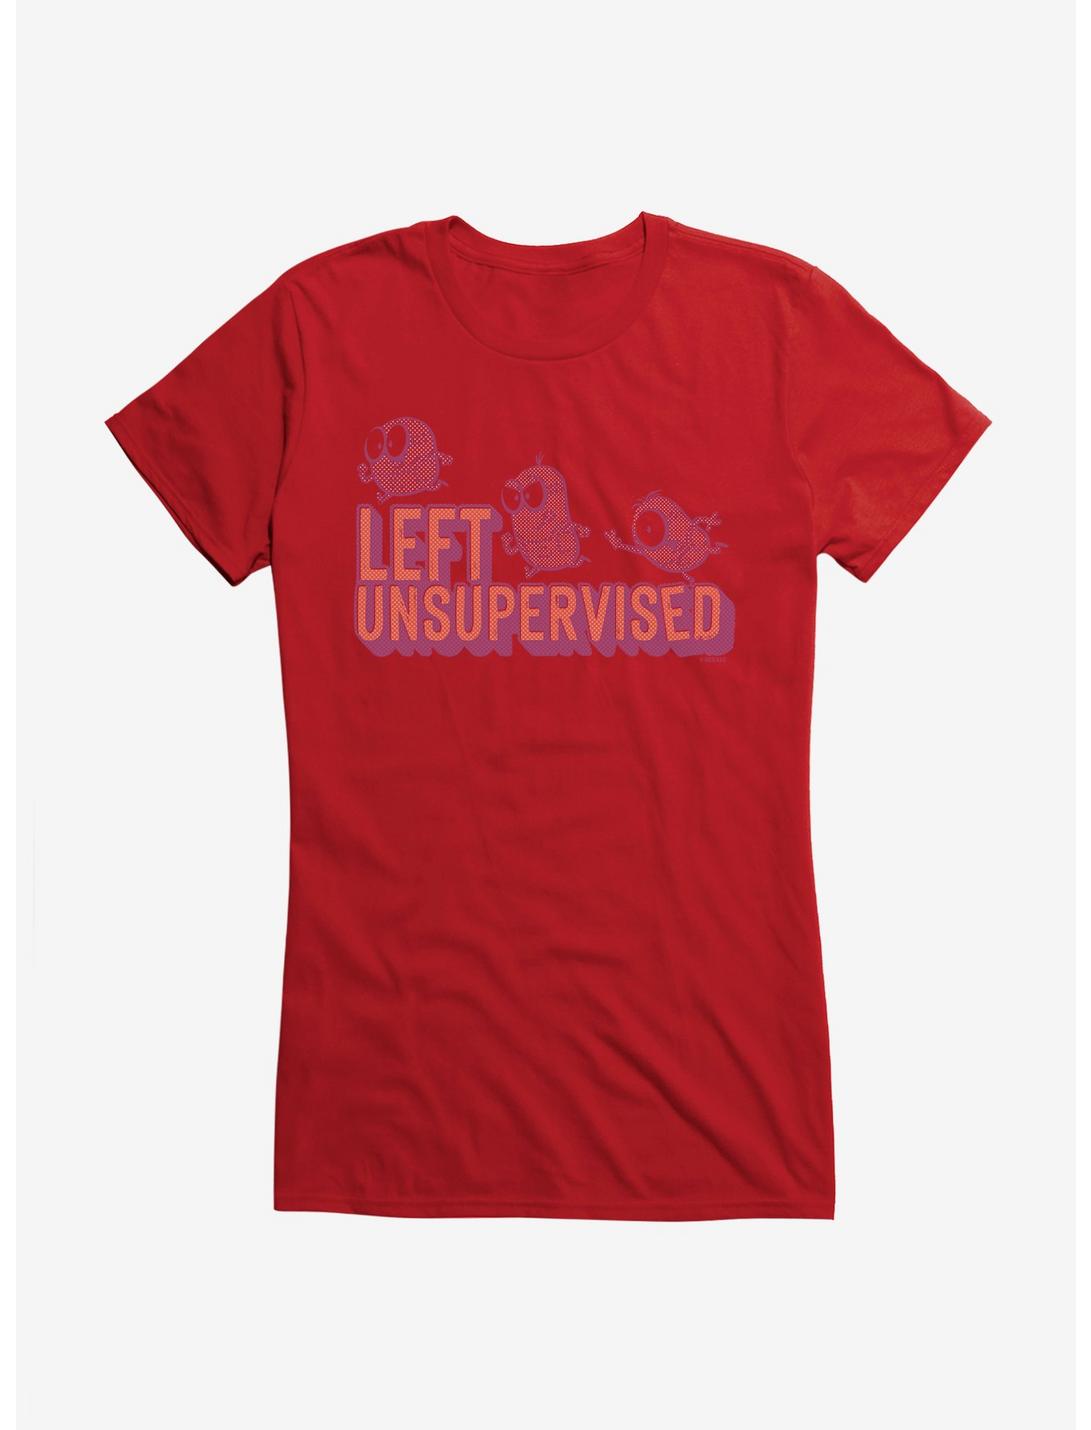 Minions Spotty Left Unsupervised Girls T-Shirt, RED, hi-res